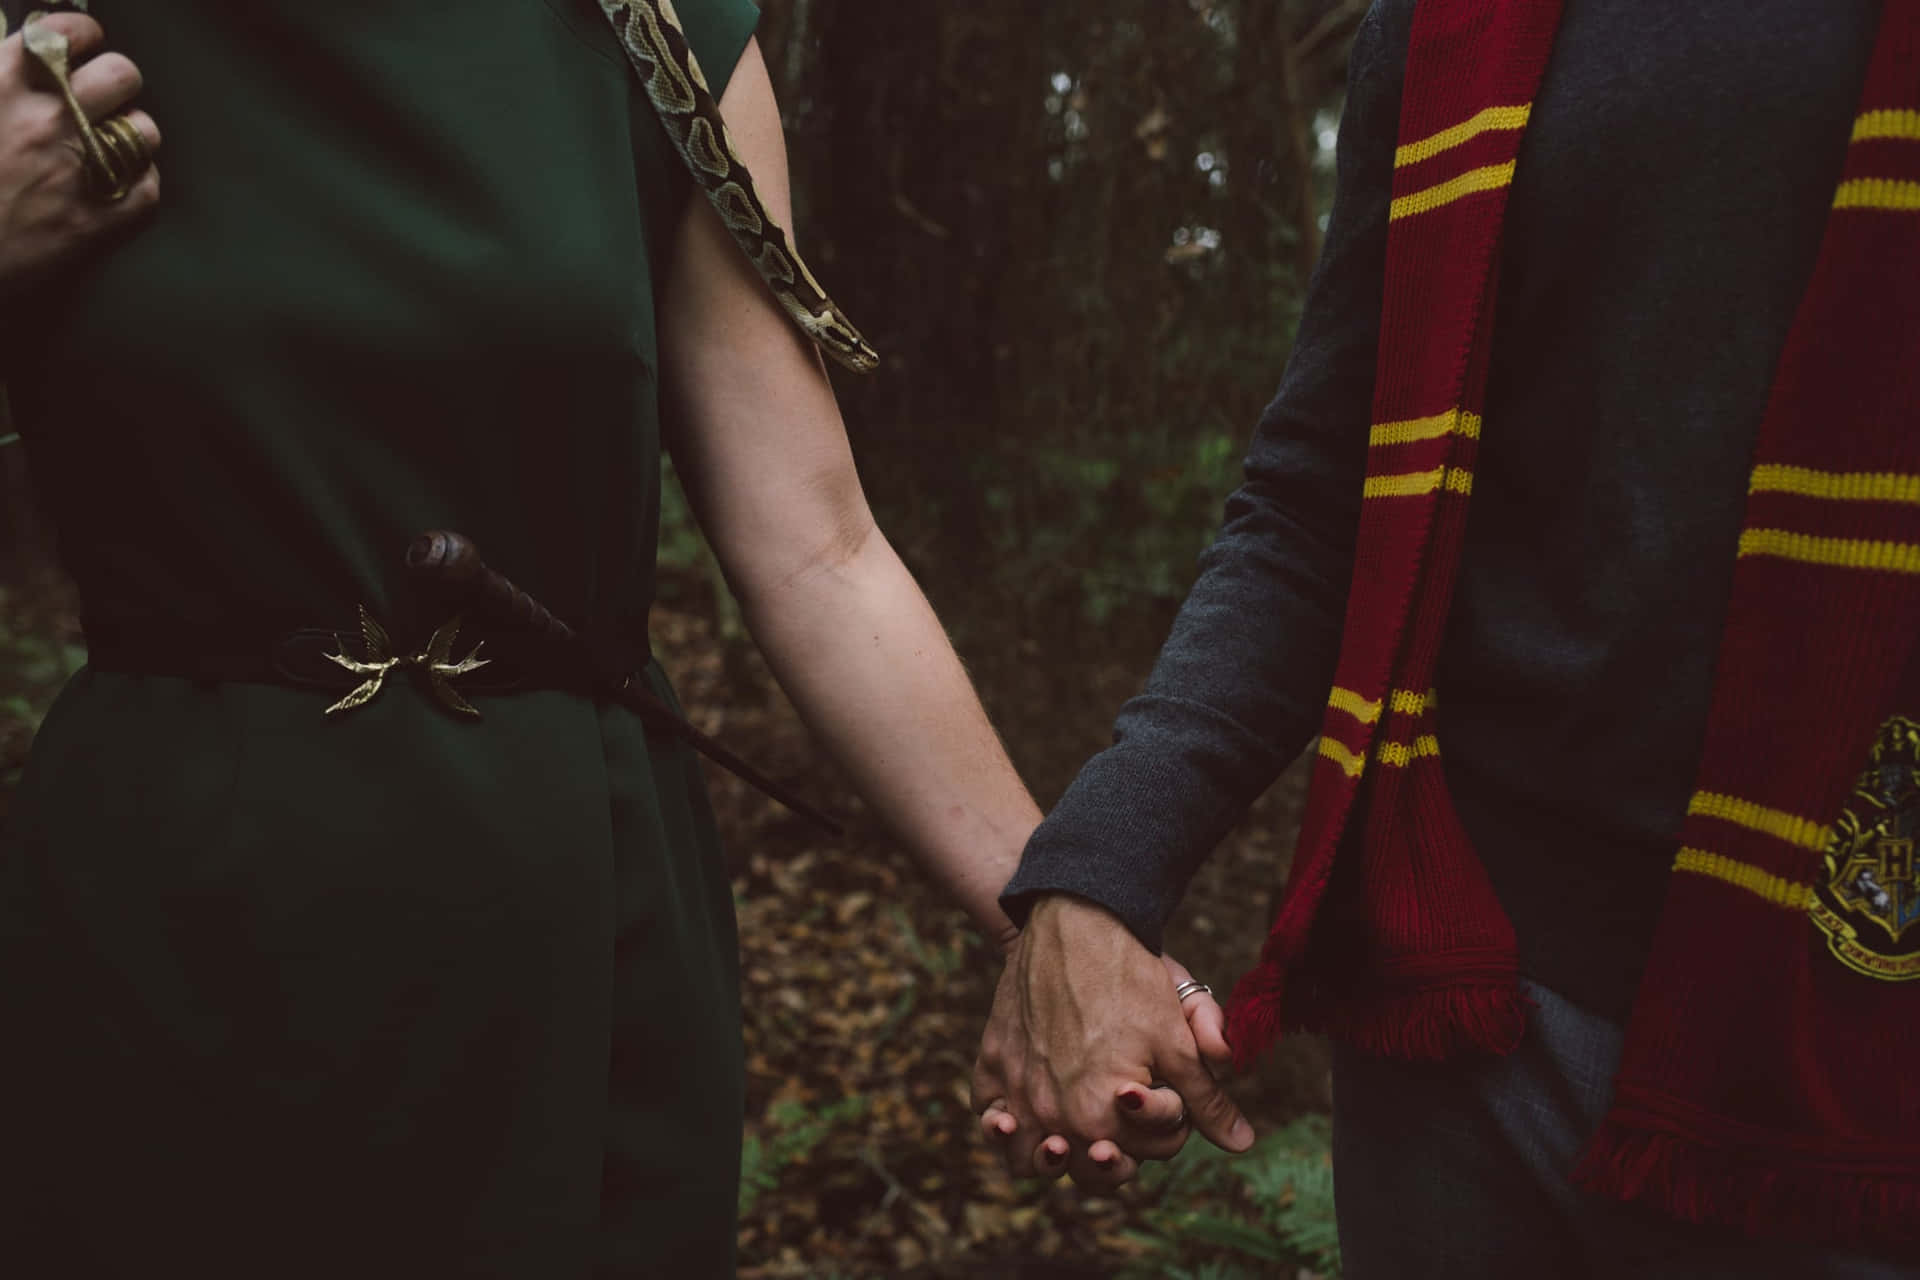 "Welcome to Slytherin Aesthetic, Embrace Your Inner Serpent!"